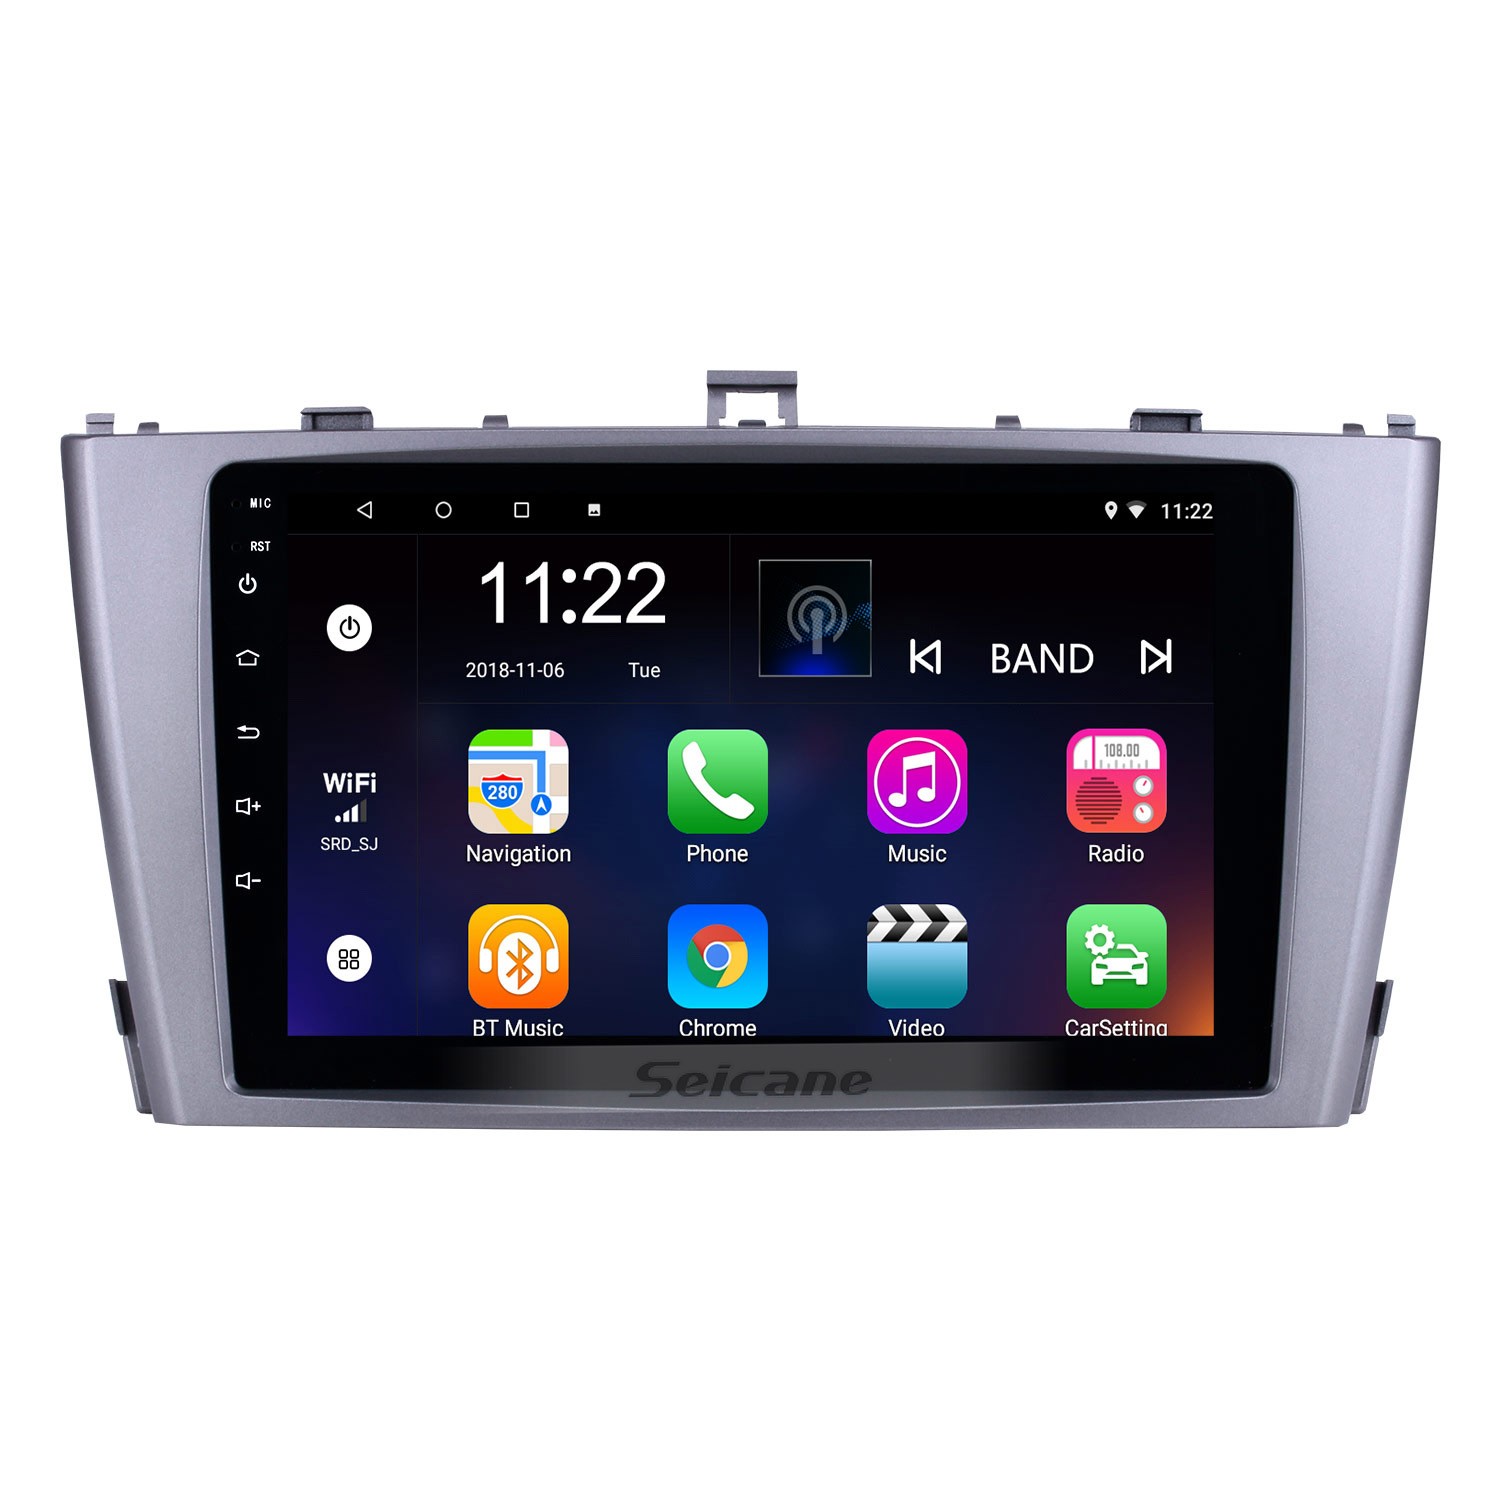 Android 13.0 GPS Navigation Bluetooth Wheel Mirror Steering Phone Radio AVENSIS 2009-2013 Wifi with 9 1024*600 Link support for Toyota DVR Control Touchscreen inch